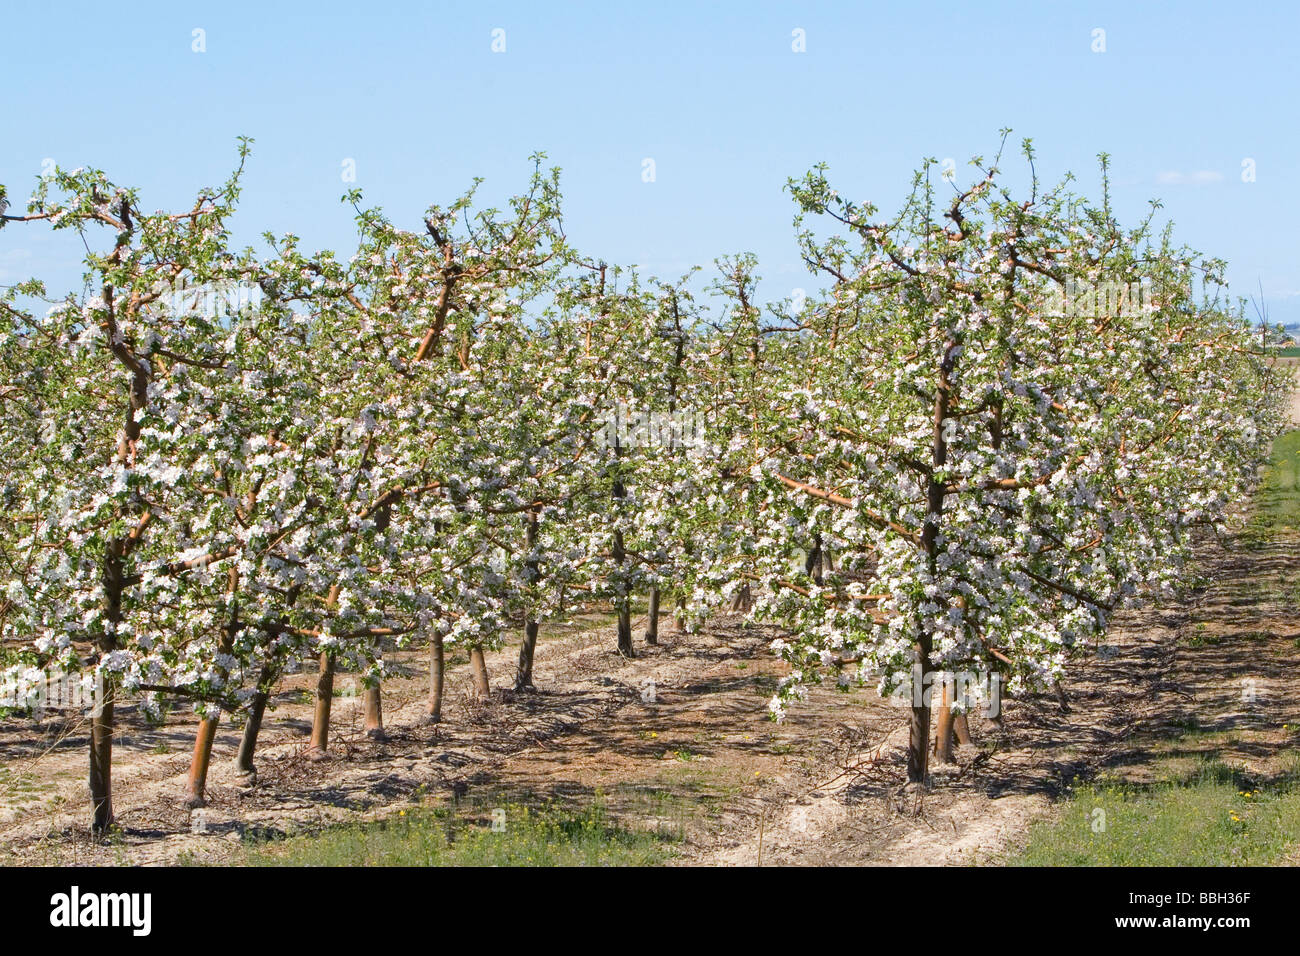 Apple blossoms on trees in an orchard near Parma Idaho USA  Stock Photo